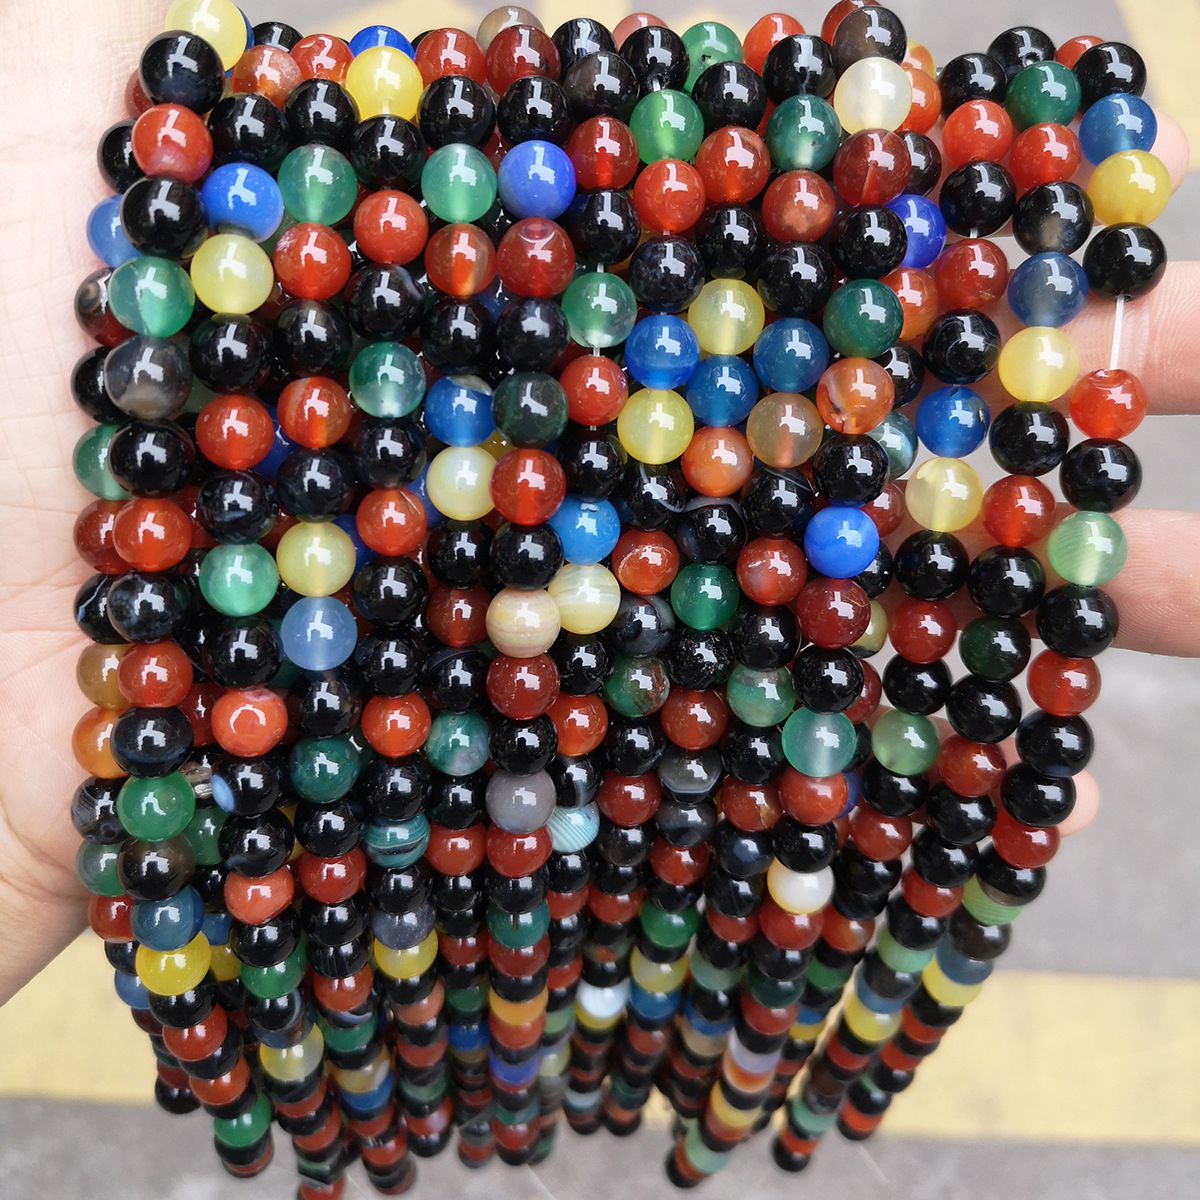 Glossy colorful agate 4mm 90 pcs